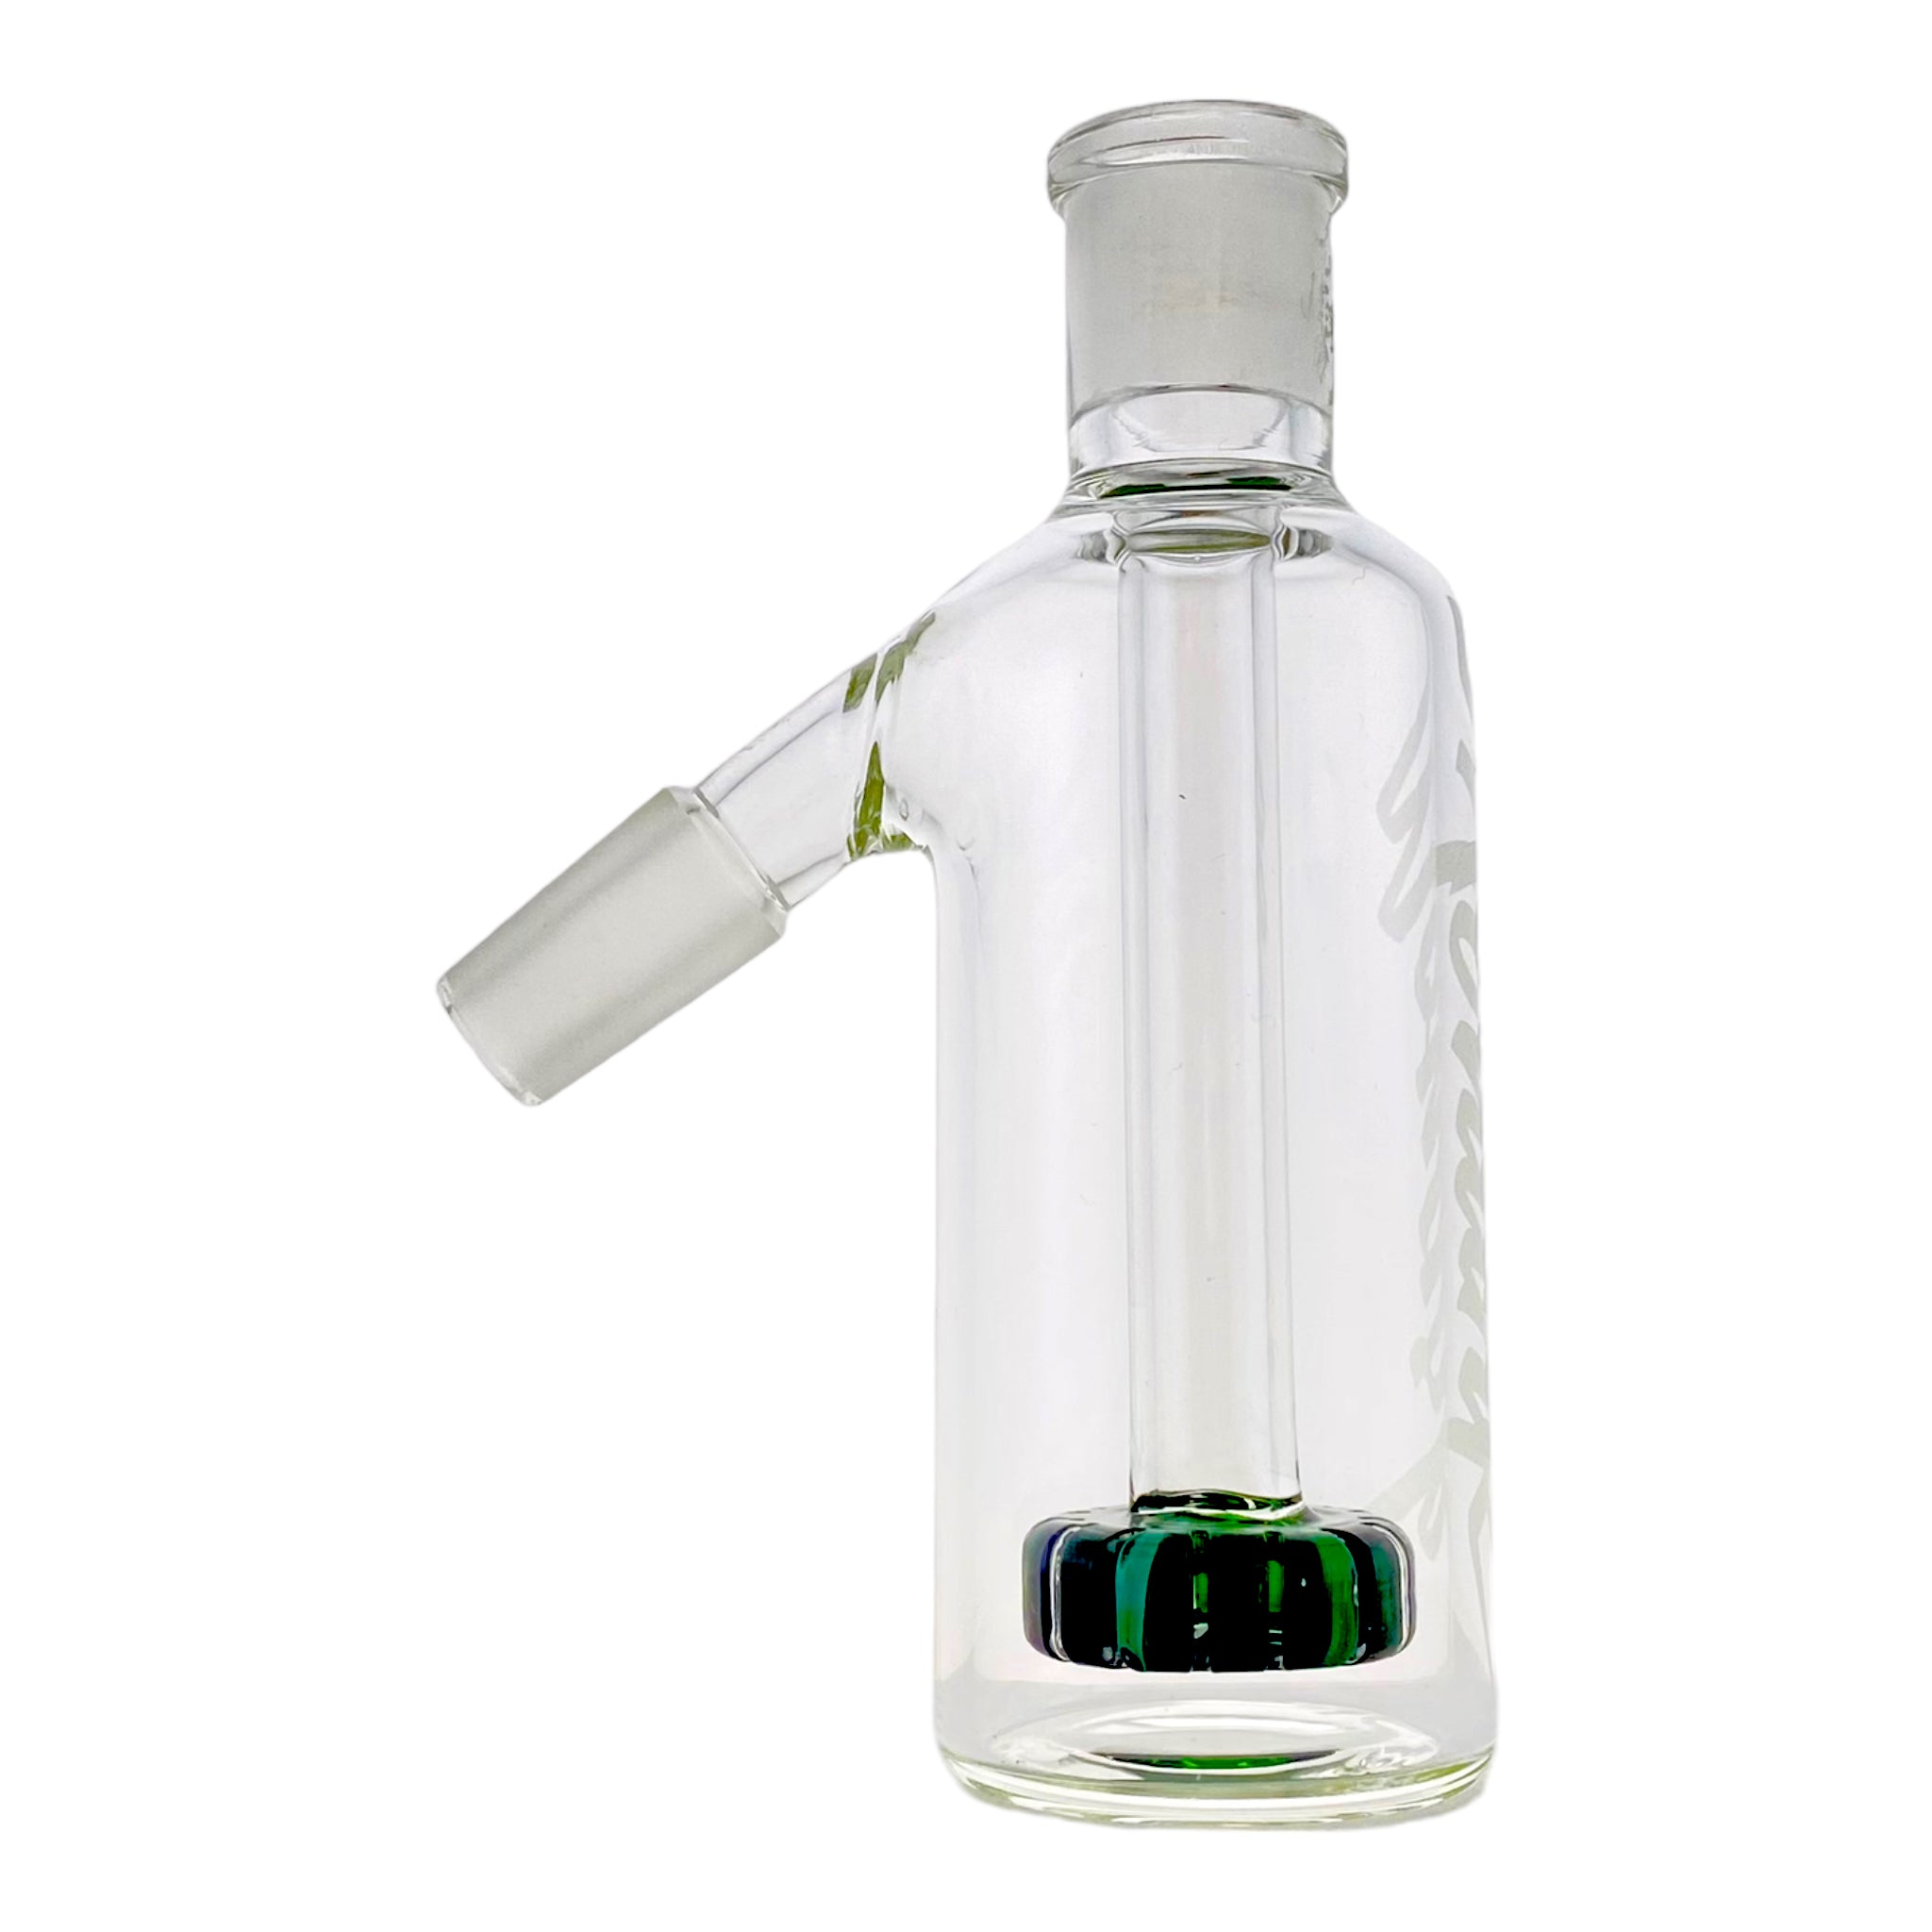 Monark Glass - 14mm Ash Catcher With 45 Degree Joint And Green Shower Head Perc